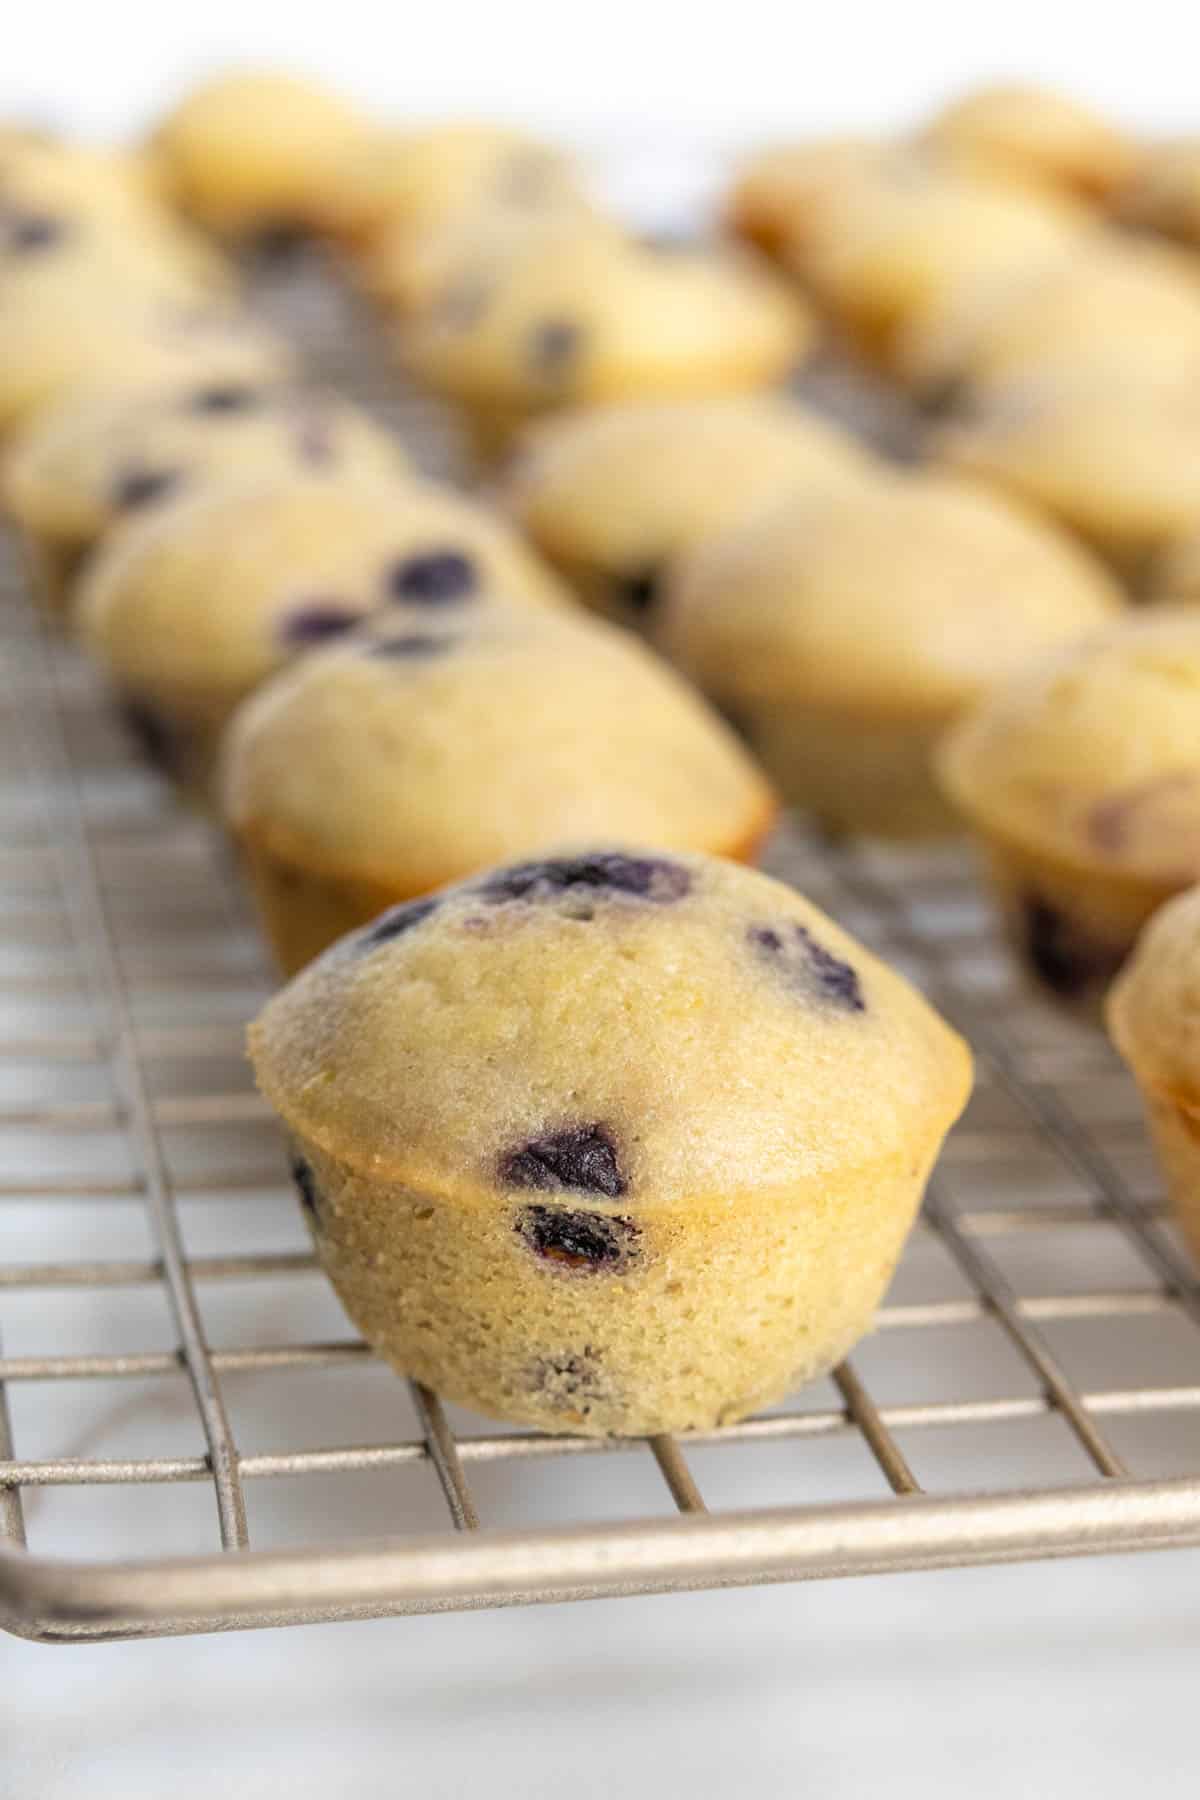 Mini blueberry muffins cooling on a wire rack.